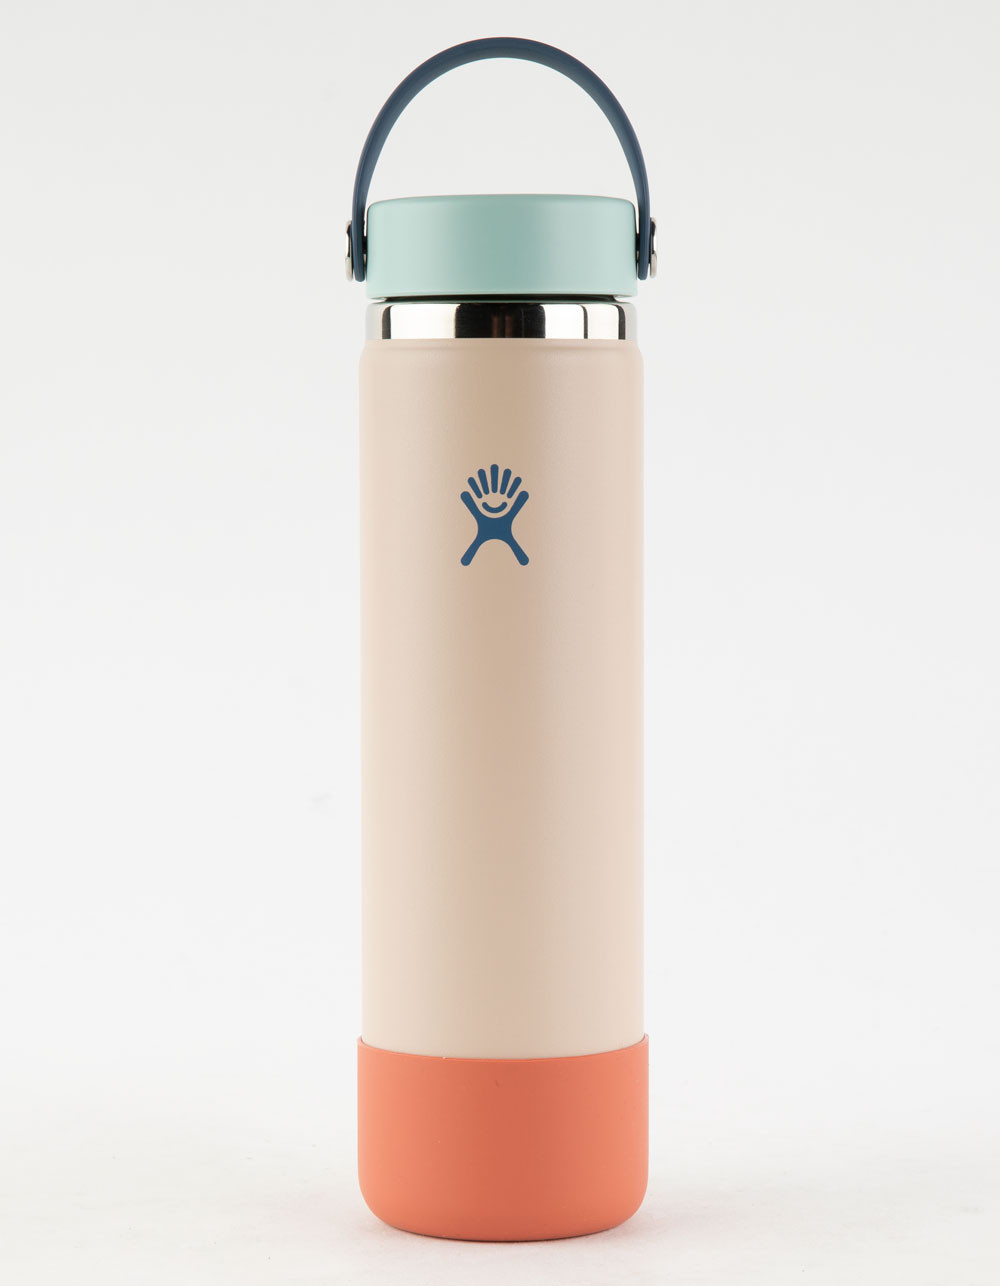 Hydro Flask Slim Cooler Cup white & Purple 12 oz. Special Edition